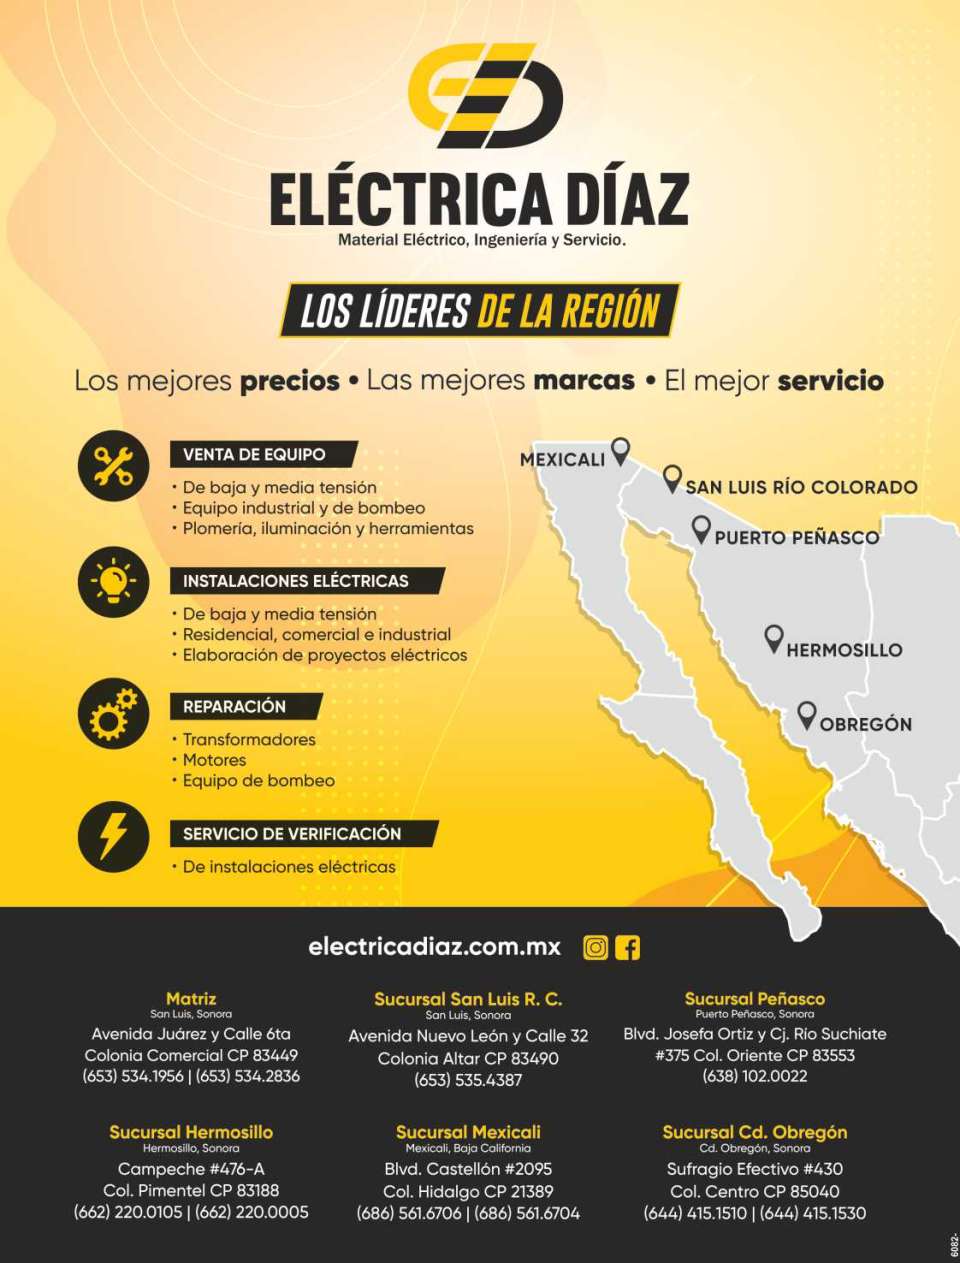 Electrica Diaz: Electrical material, Engineering and Service. The best prices. The best brands. The best service. *Equipment Sale *Electrical installations *Repair *Verification Service